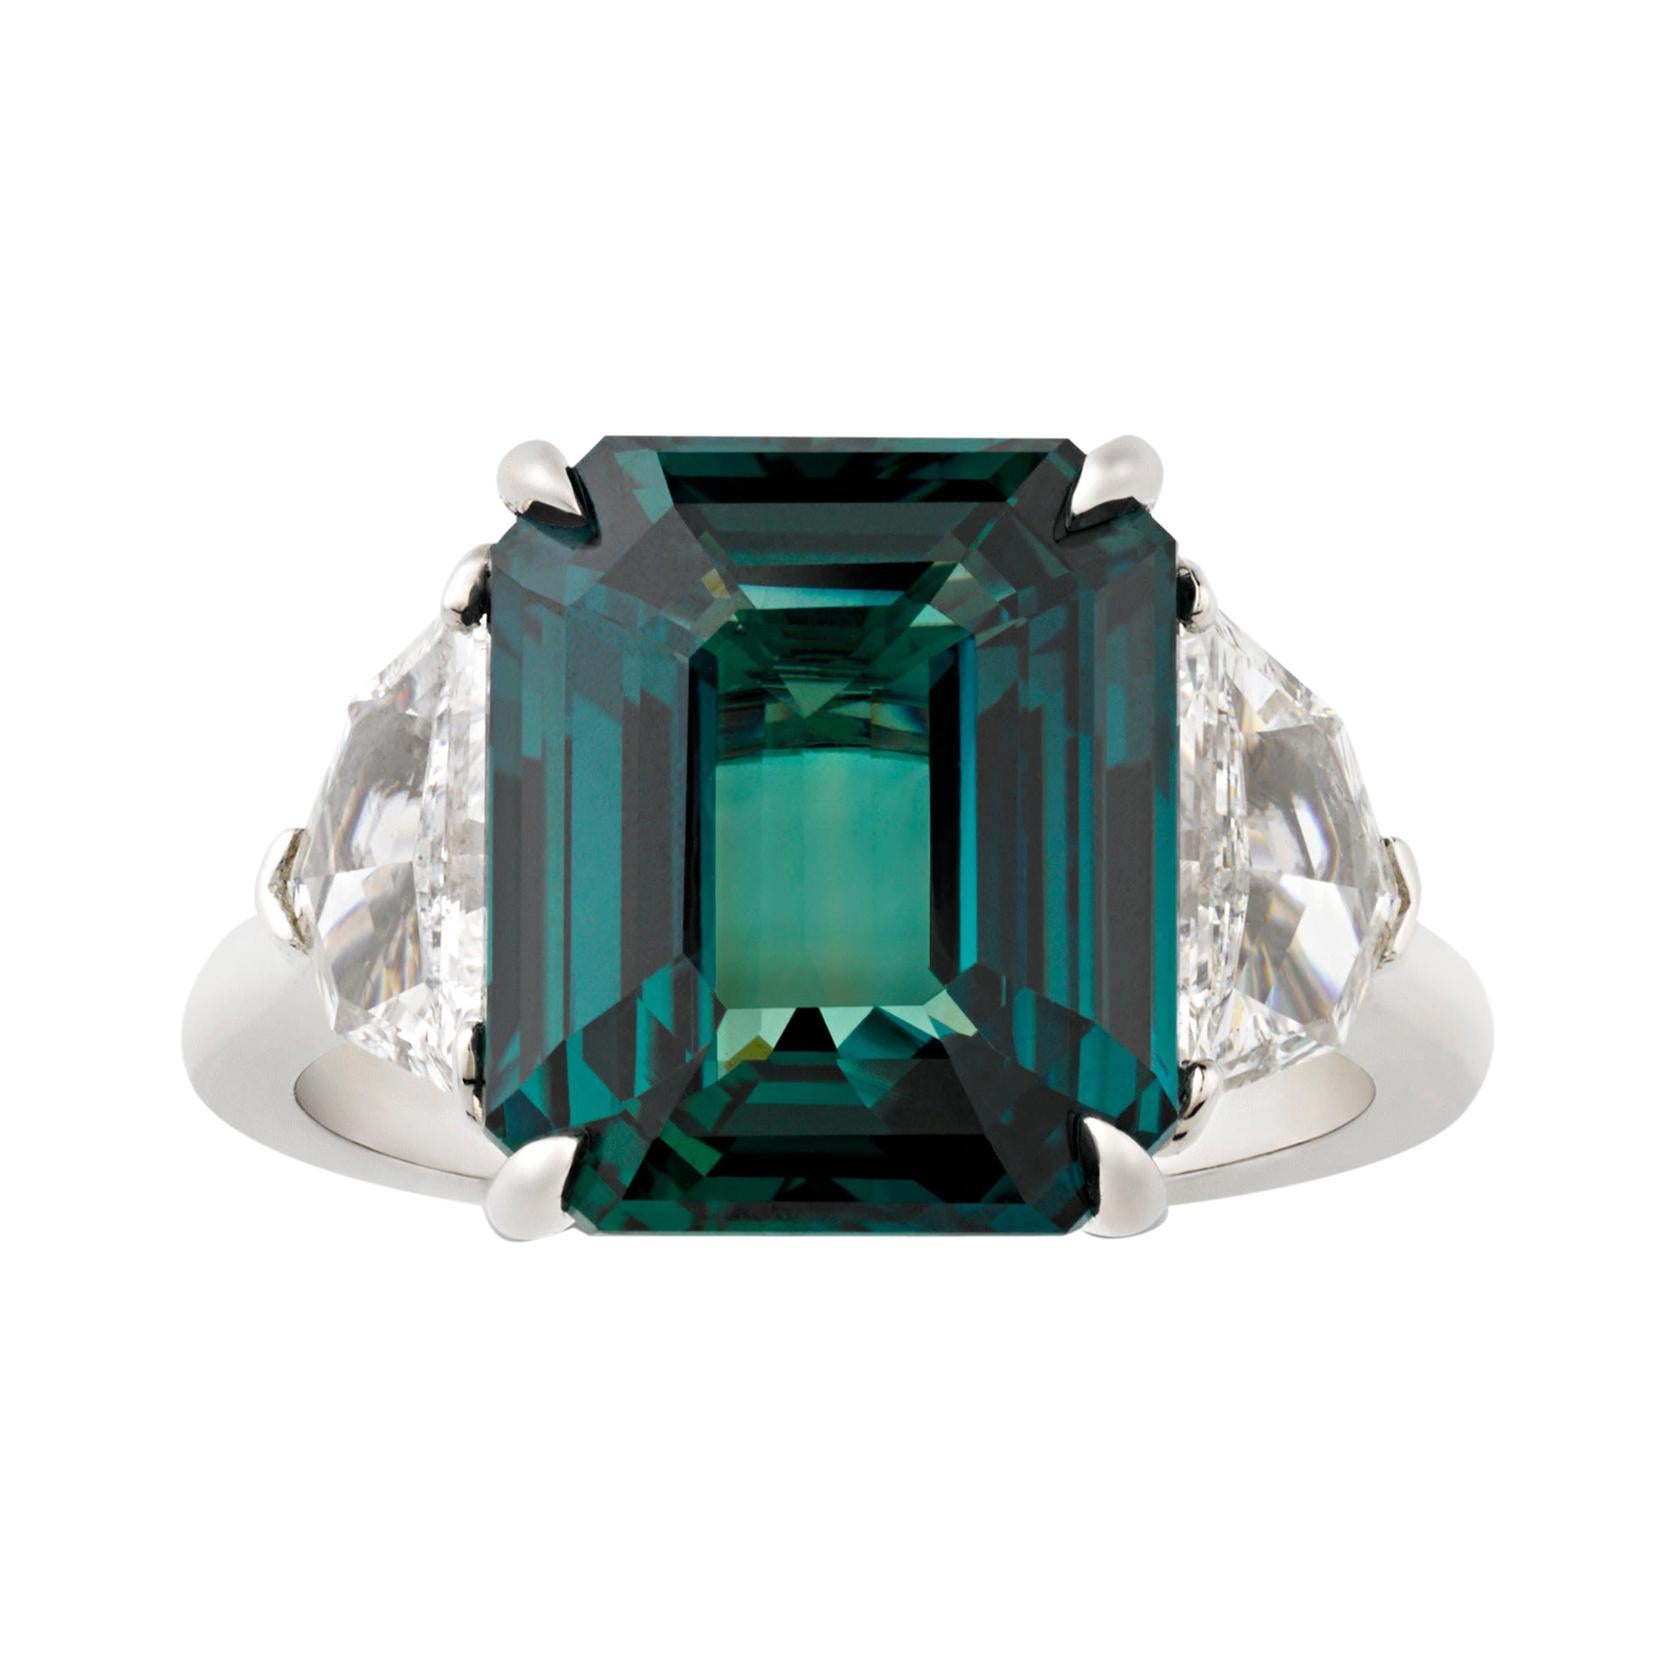 Untreated Bluish-Green Sapphire Ring, 8.03 Carats